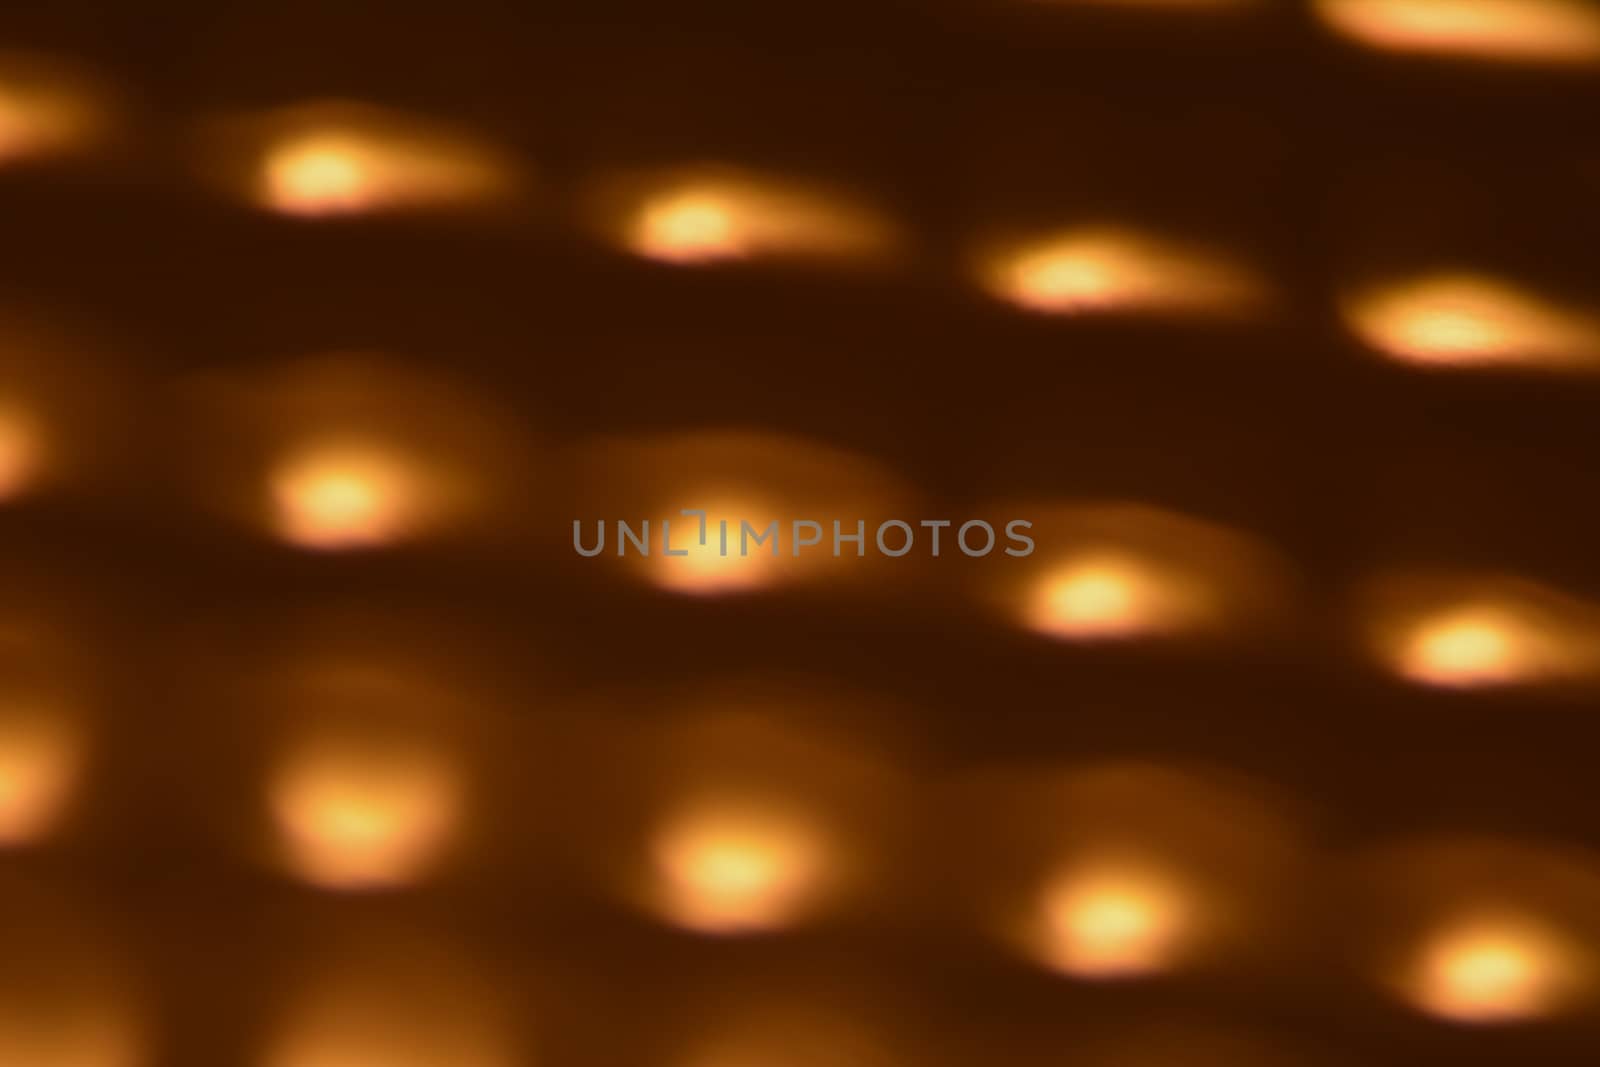 Blurred glowing circles pattern by photosampler